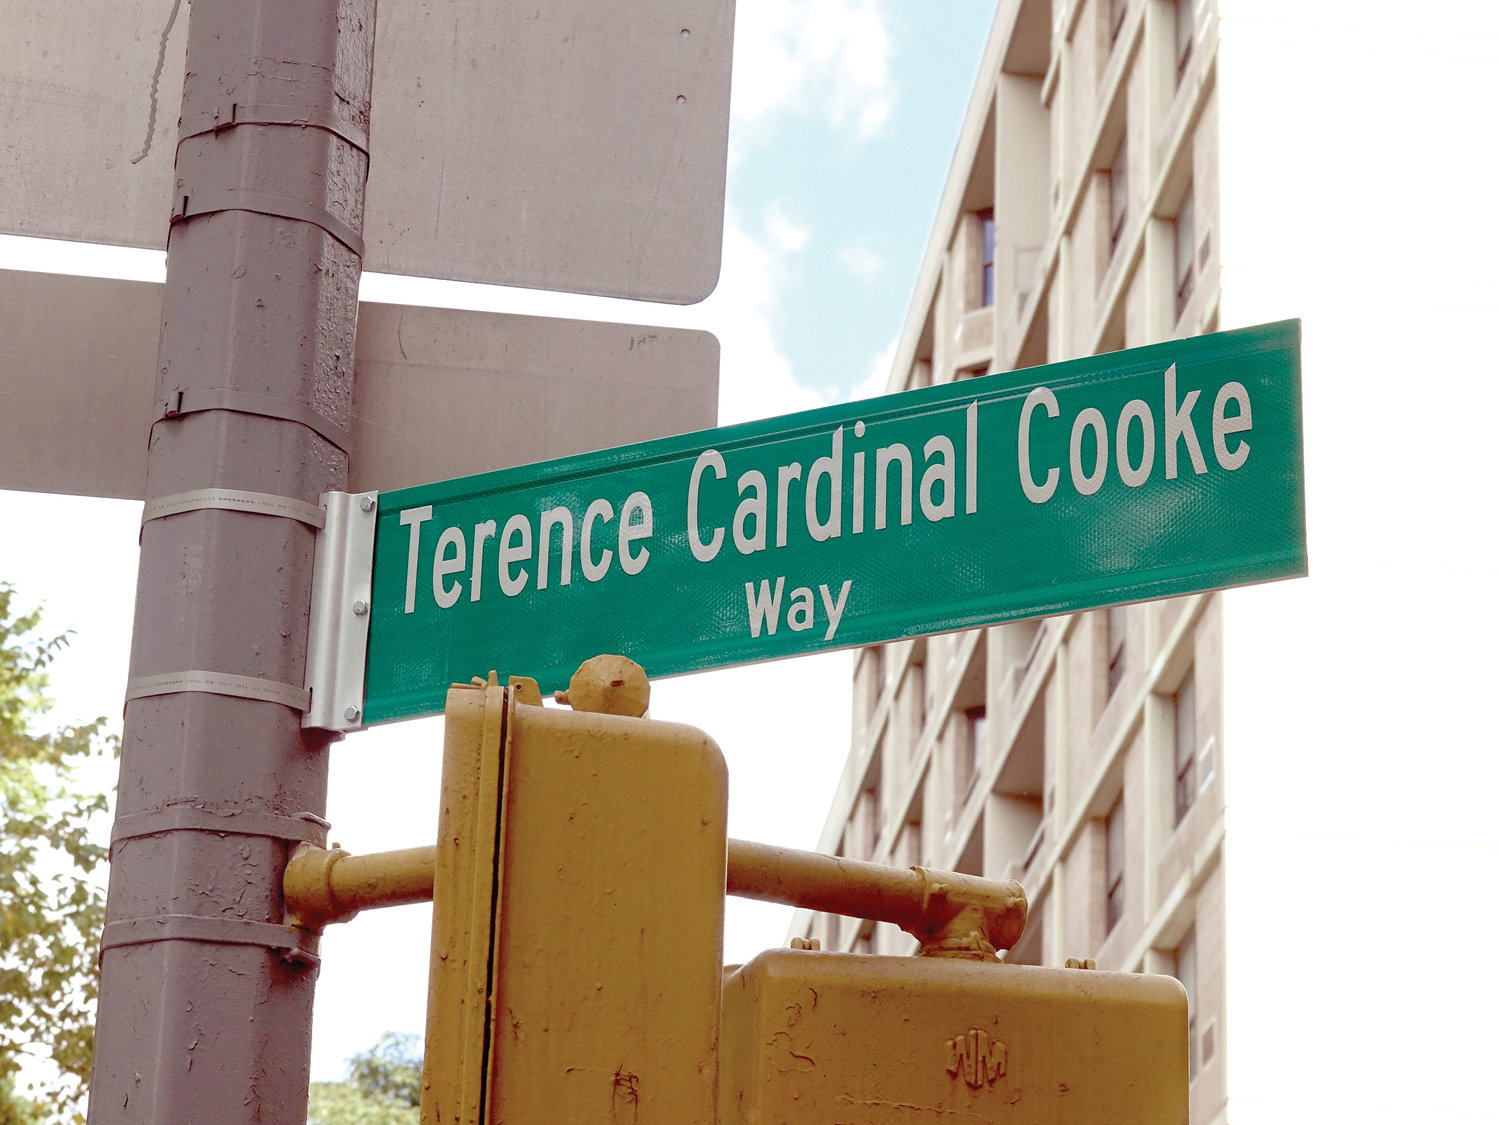 The street sign located at the corner of Fifth Avenue and 106th Street.